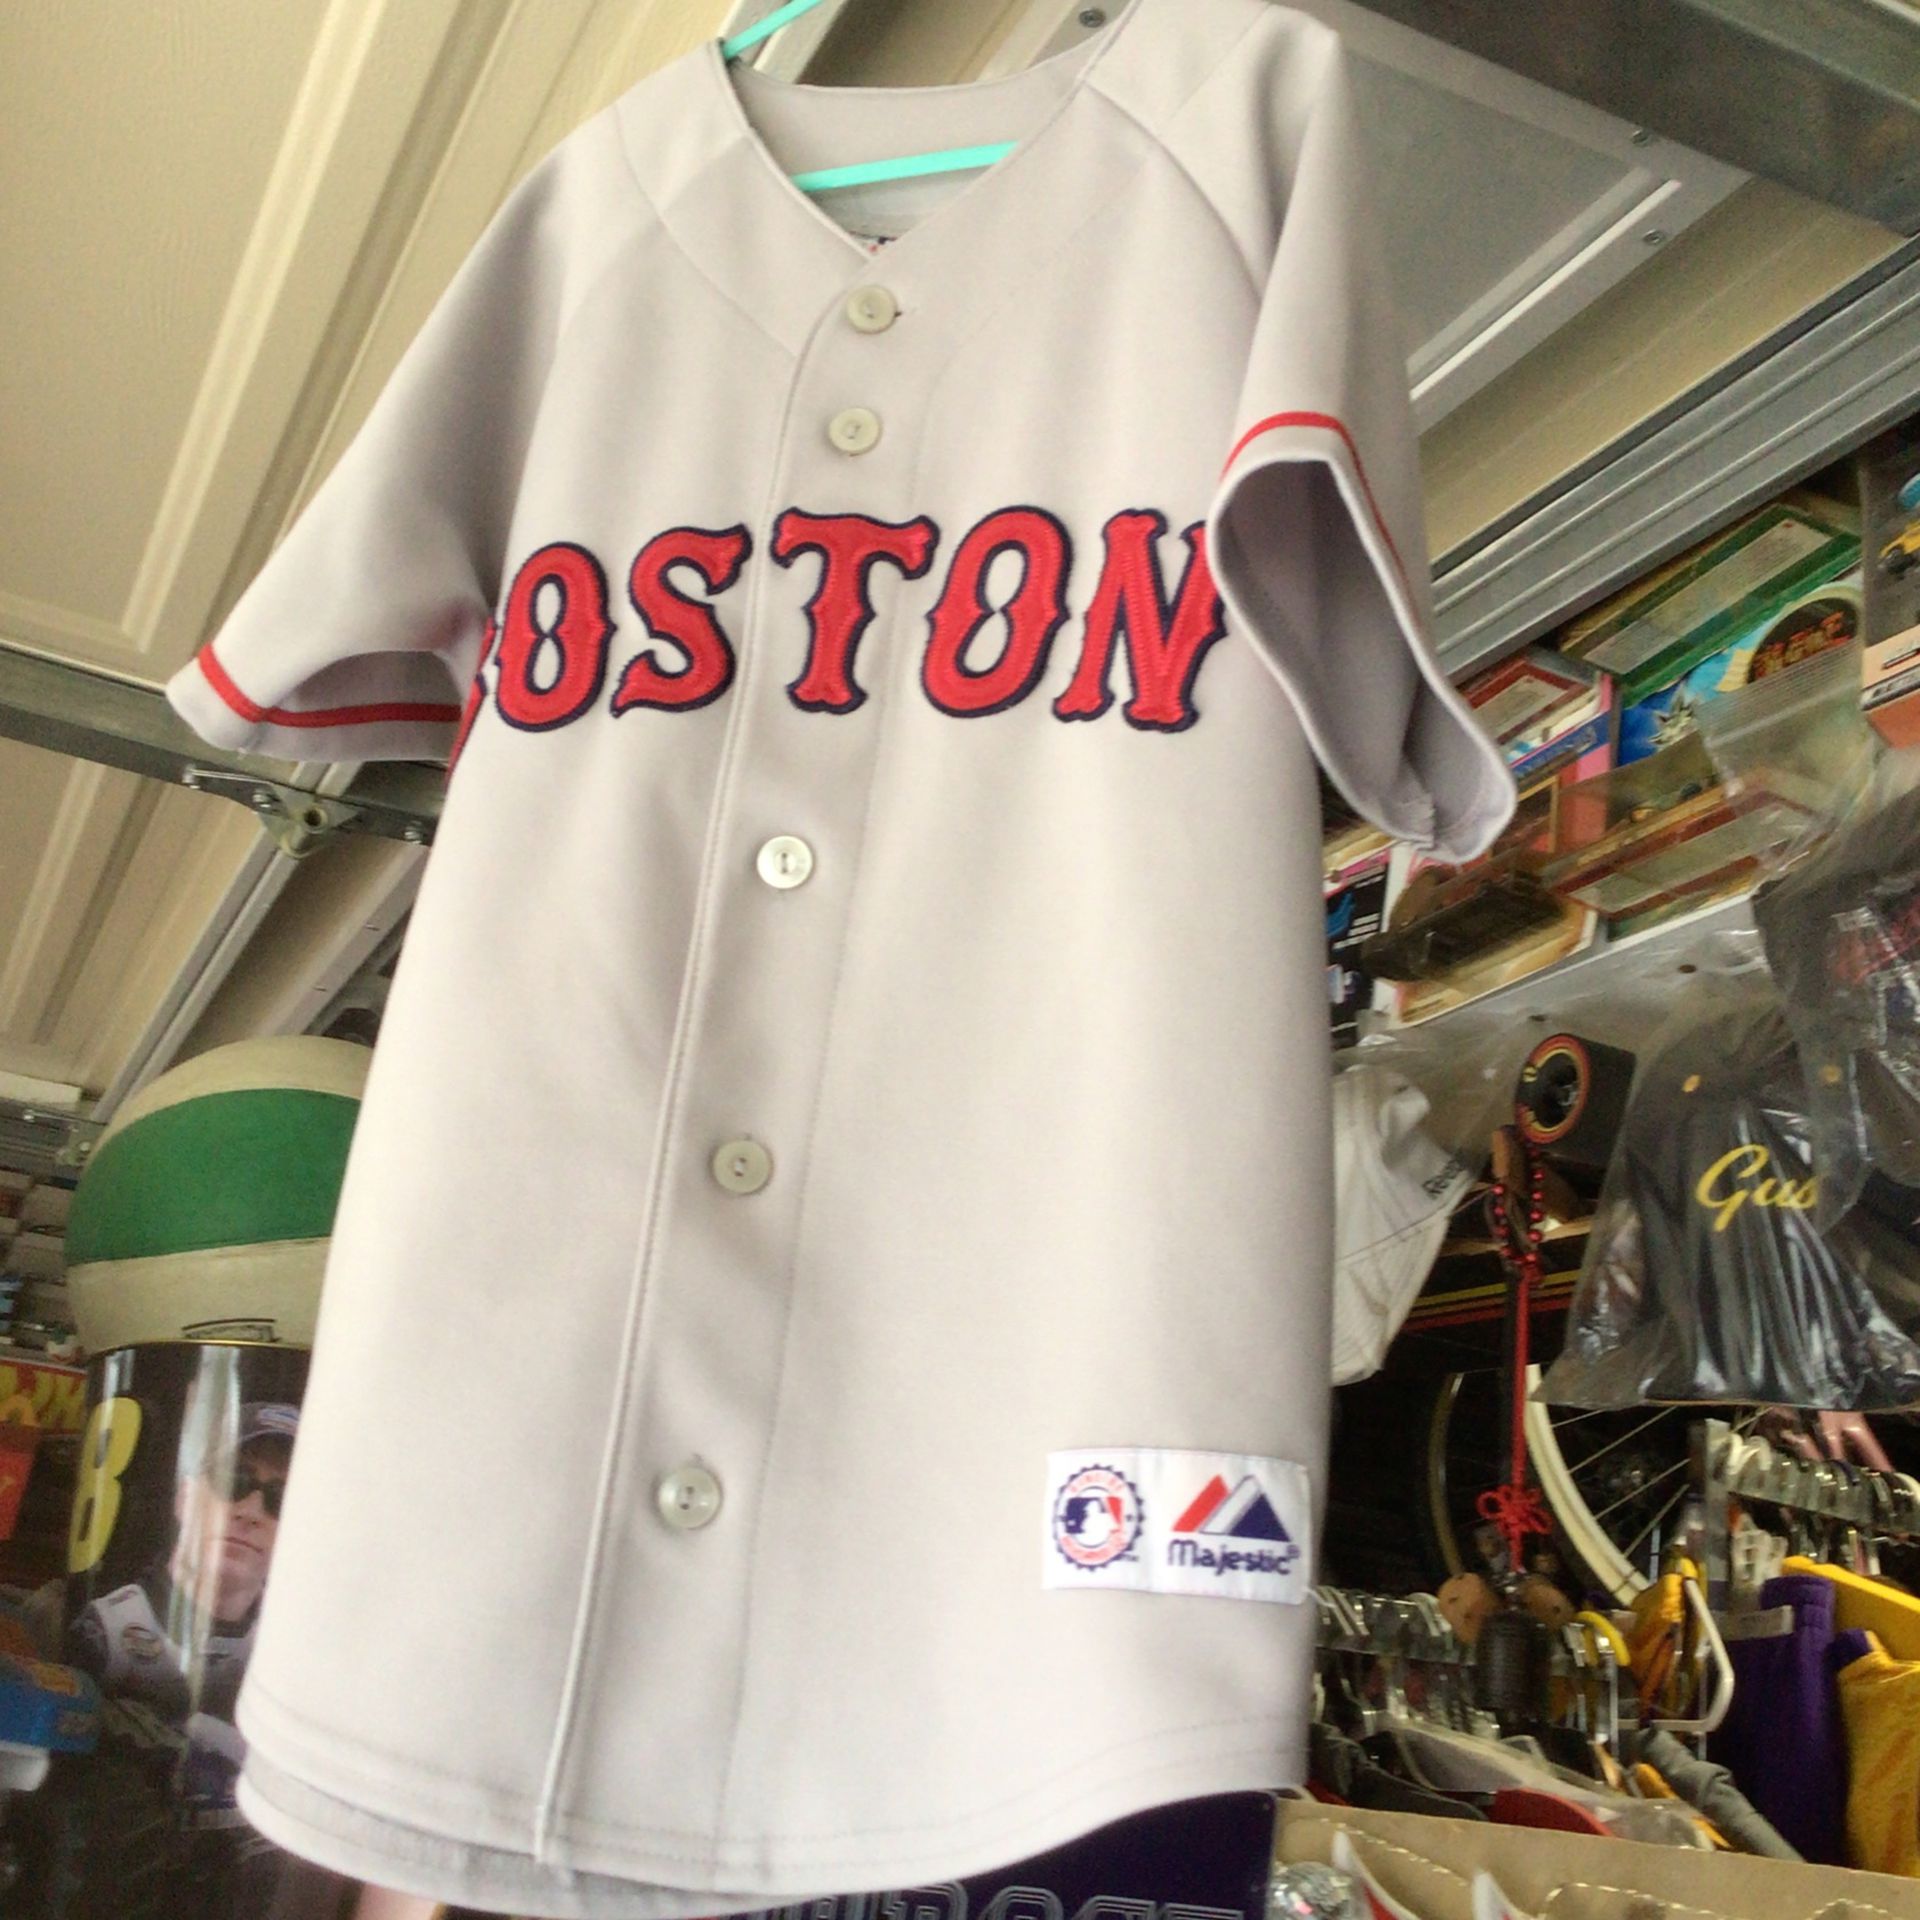 Boston Red Sox Youth Baseball Jersey Size L 8/10 Yrs Old